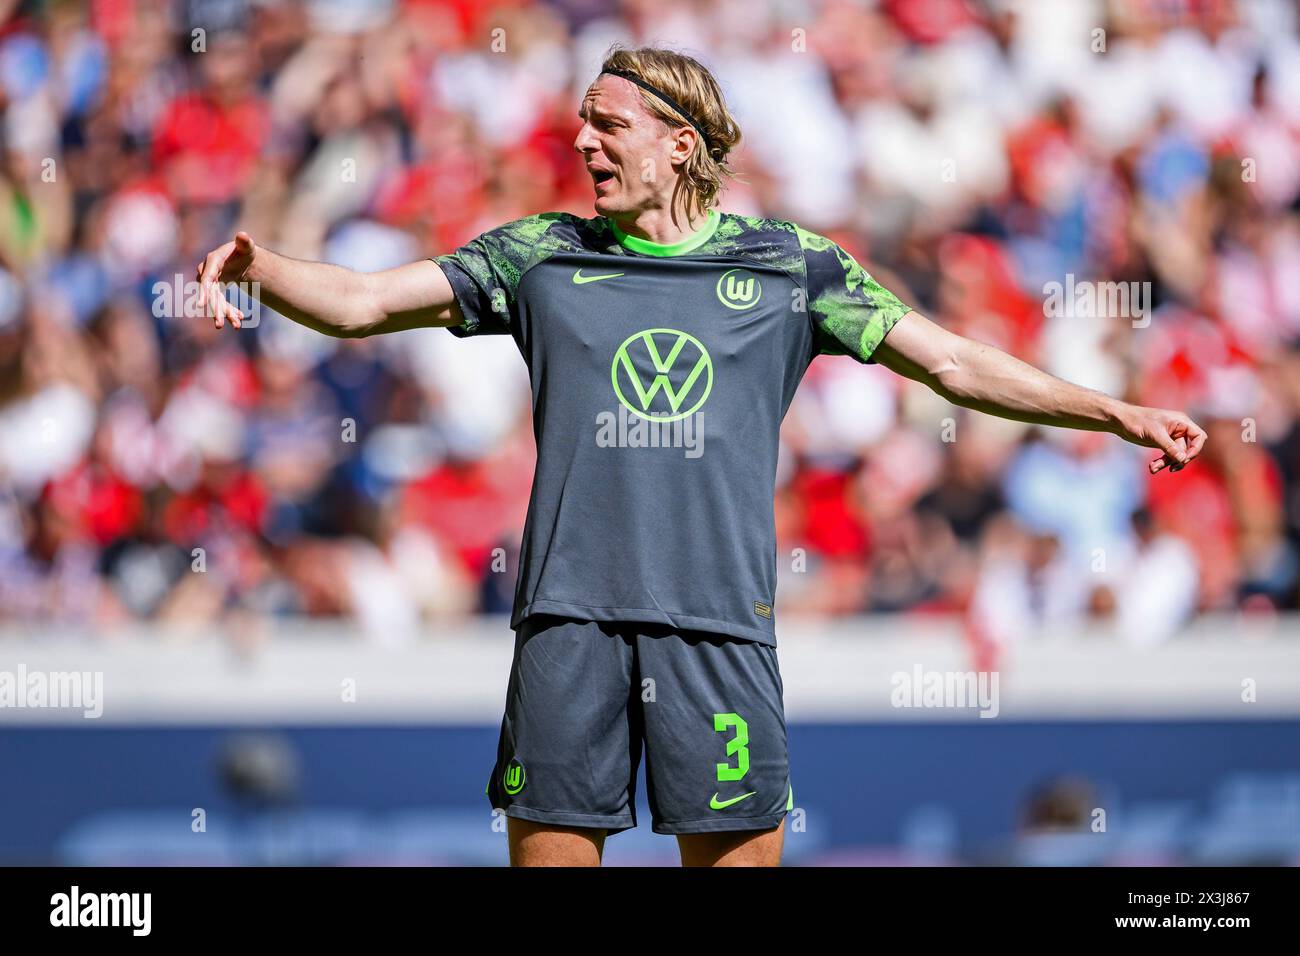 Freiburg Im Breisgau, Germany. 27th Apr, 2024. Soccer: Bundesliga, SC Freiburg - VfL Wolfsburg, Matchday 31, Europa-Park Stadium. Wolfsburg's Sebastiaan Bornauw reacts during the match. Credit: Tom Weller/dpa - IMPORTANT NOTE: In accordance with the regulations of the DFL German Football League and the DFB German Football Association, it is prohibited to utilize or have utilized photographs taken in the stadium and/or of the match in the form of sequential images and/or video-like photo series./dpa/Alamy Live News Stock Photo